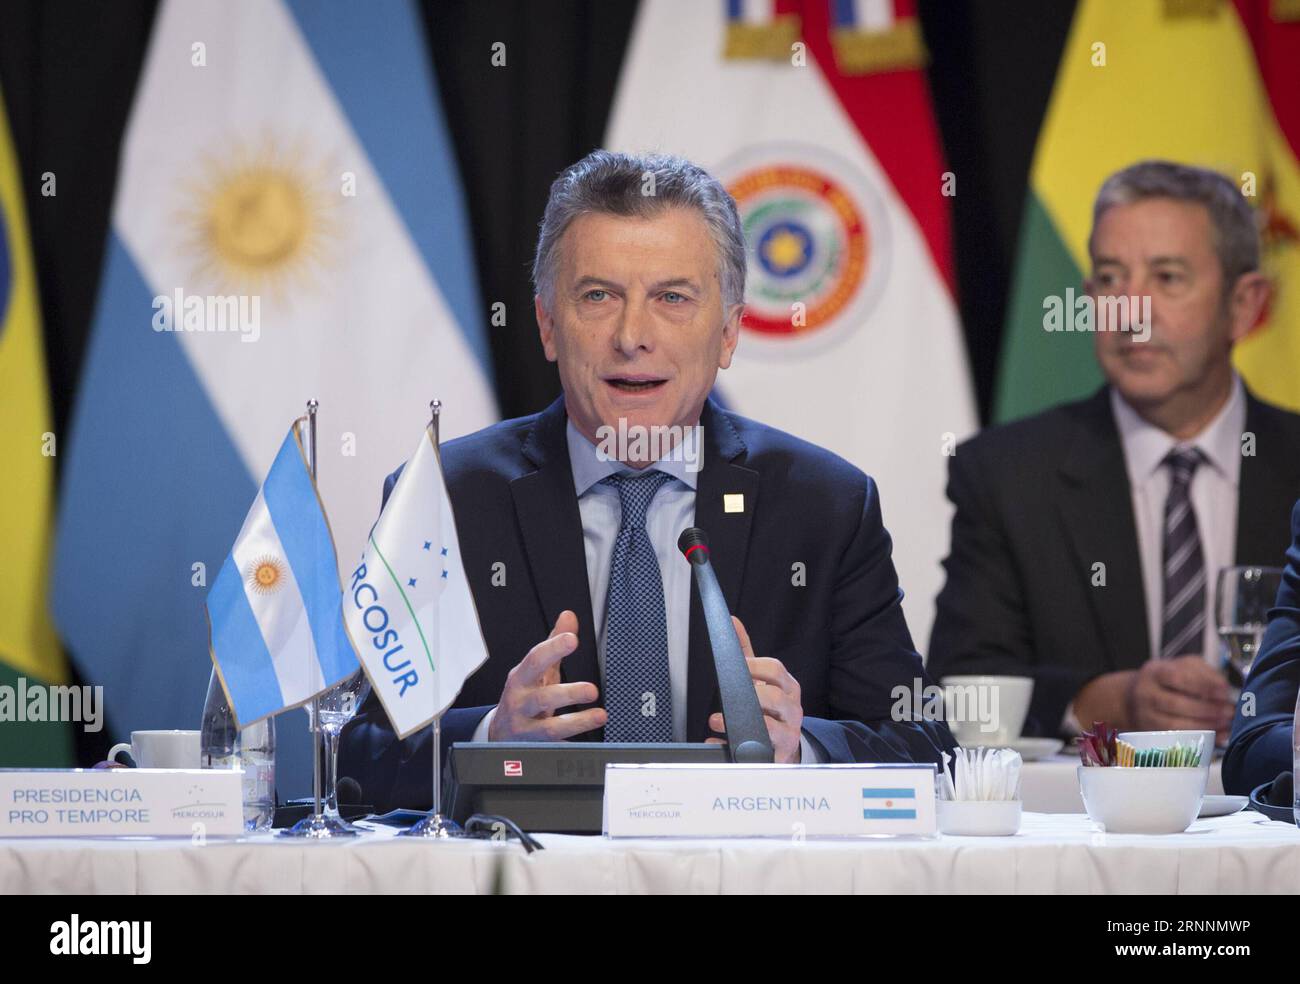 (170722) -- MENDOZA, July 22, 2017 -- President of Argentina Mauricio Macri addresses the Presidents meeting during the Summit of Heads of States of the Southern Common Market (Mercosur) and Associated States, in the city of Mendoza, Argentina, on July 21, 2017. Members of the Southern Common Market (Mercosur) trade bloc seek to recover the group s trade dynamism by boosting free trade among themselves and with other regions, a senior Argentine official said Friday. Martin Zabala) (ma)(gj) ARGENTINA-MENDOZA-MERCOSUR-SUMMIT e MARTINxZABALA PUBLICATIONxNOTxINxCHN   Mendoza July 22 2017 President Stock Photo